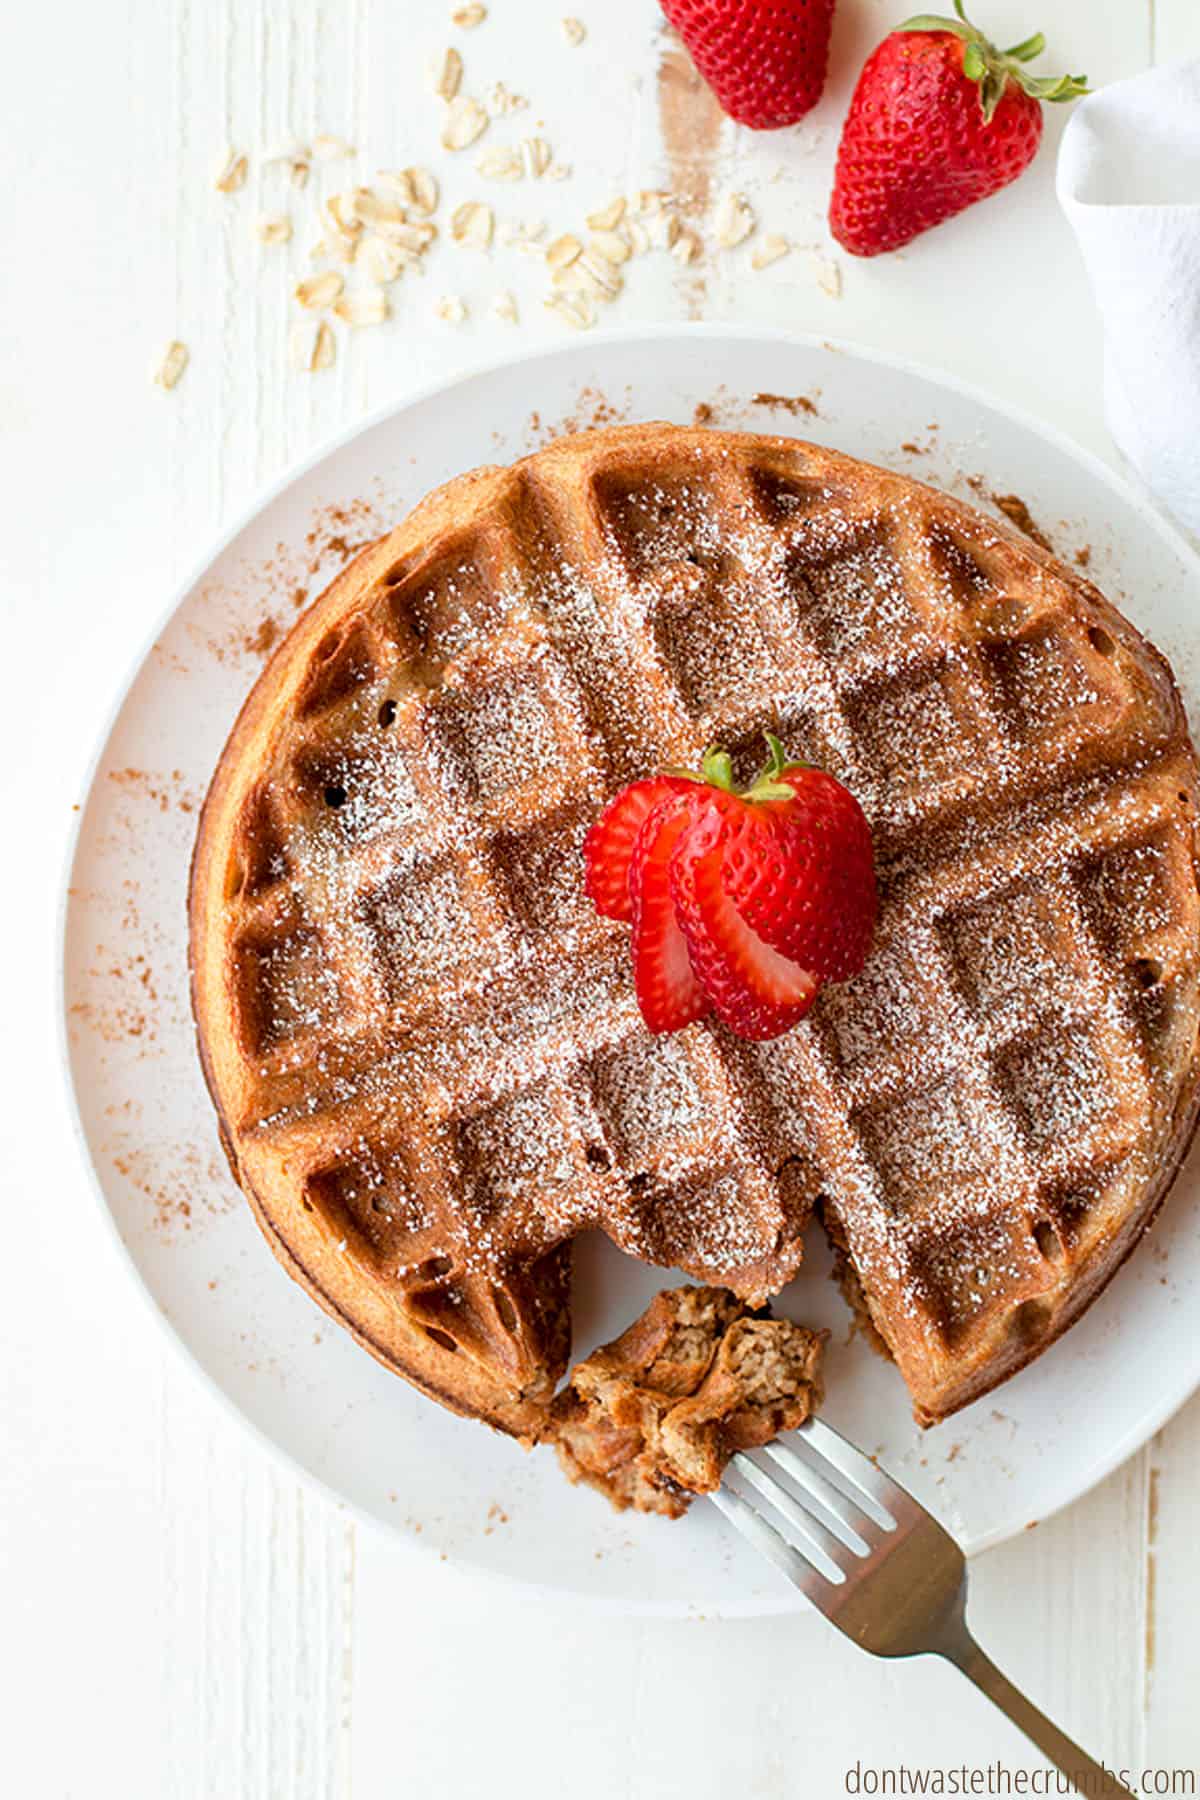 A round golden brown Belgian waffle topped with powdered sugar and sliced strawberries.